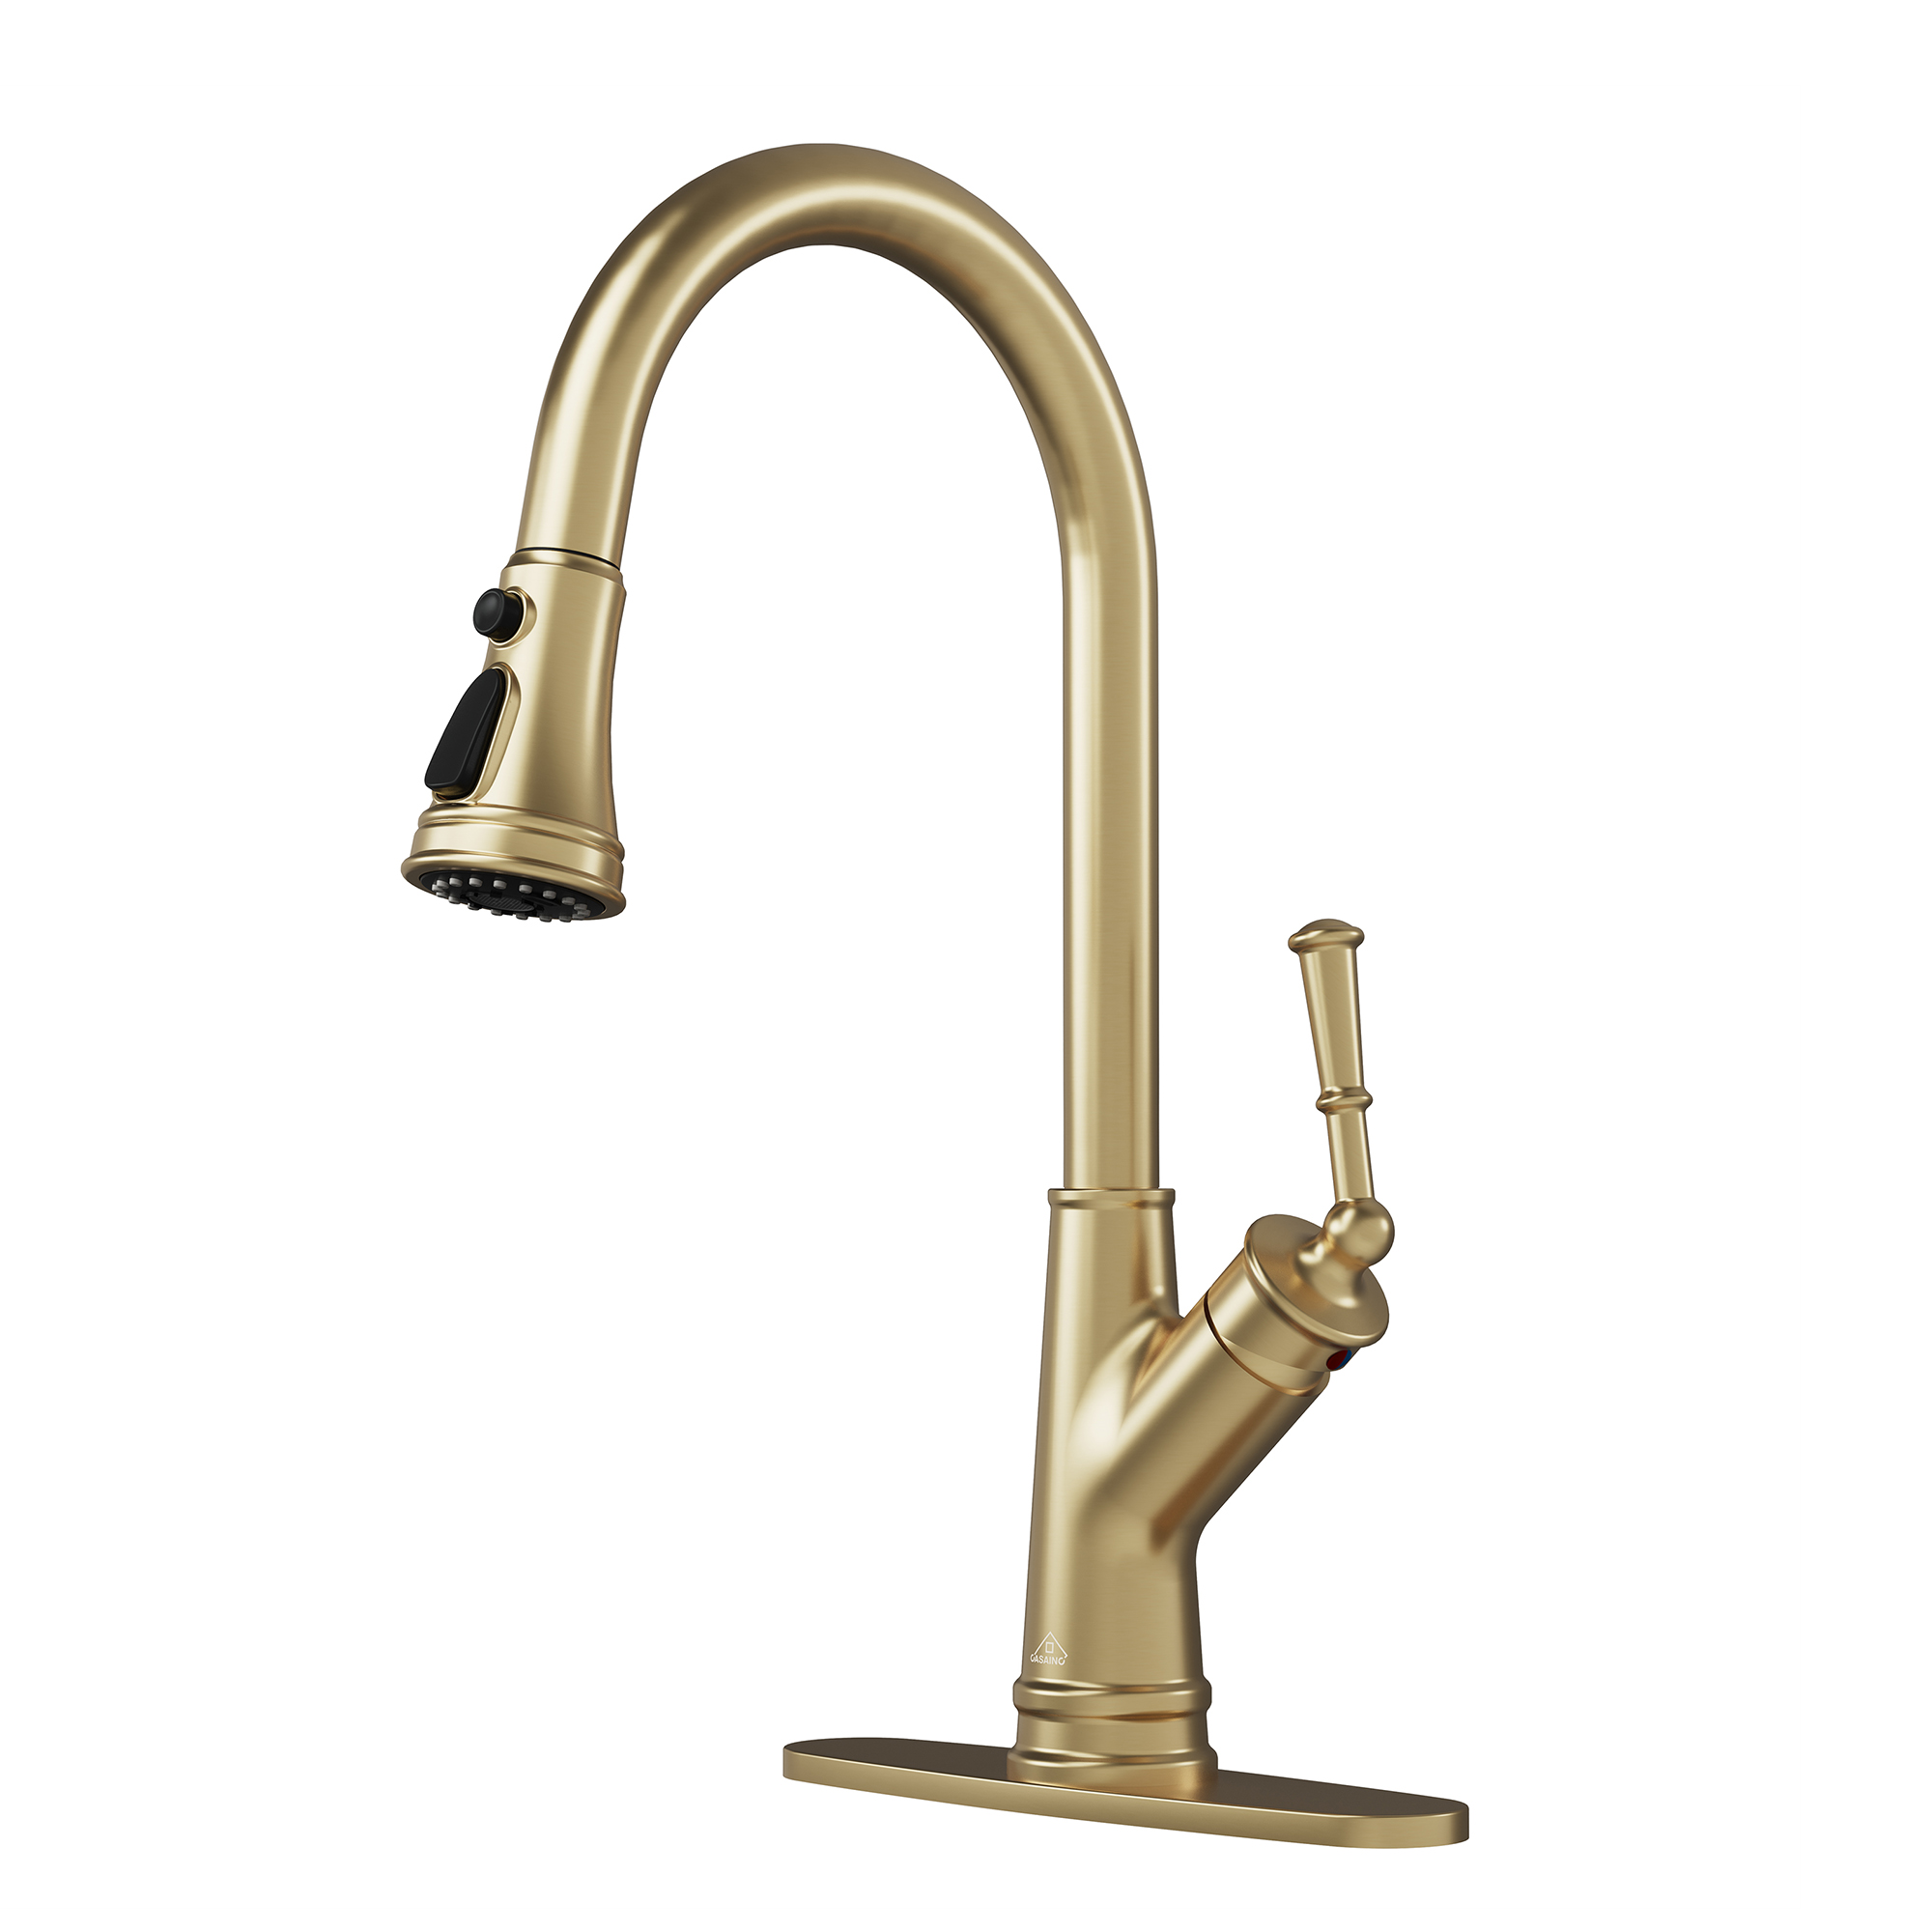 CASAINC Single-Handle Kitchen Faucet with Pull-Out Sprayer in Brushed Nickel/Matte Black/Matte White/Brushed Gold